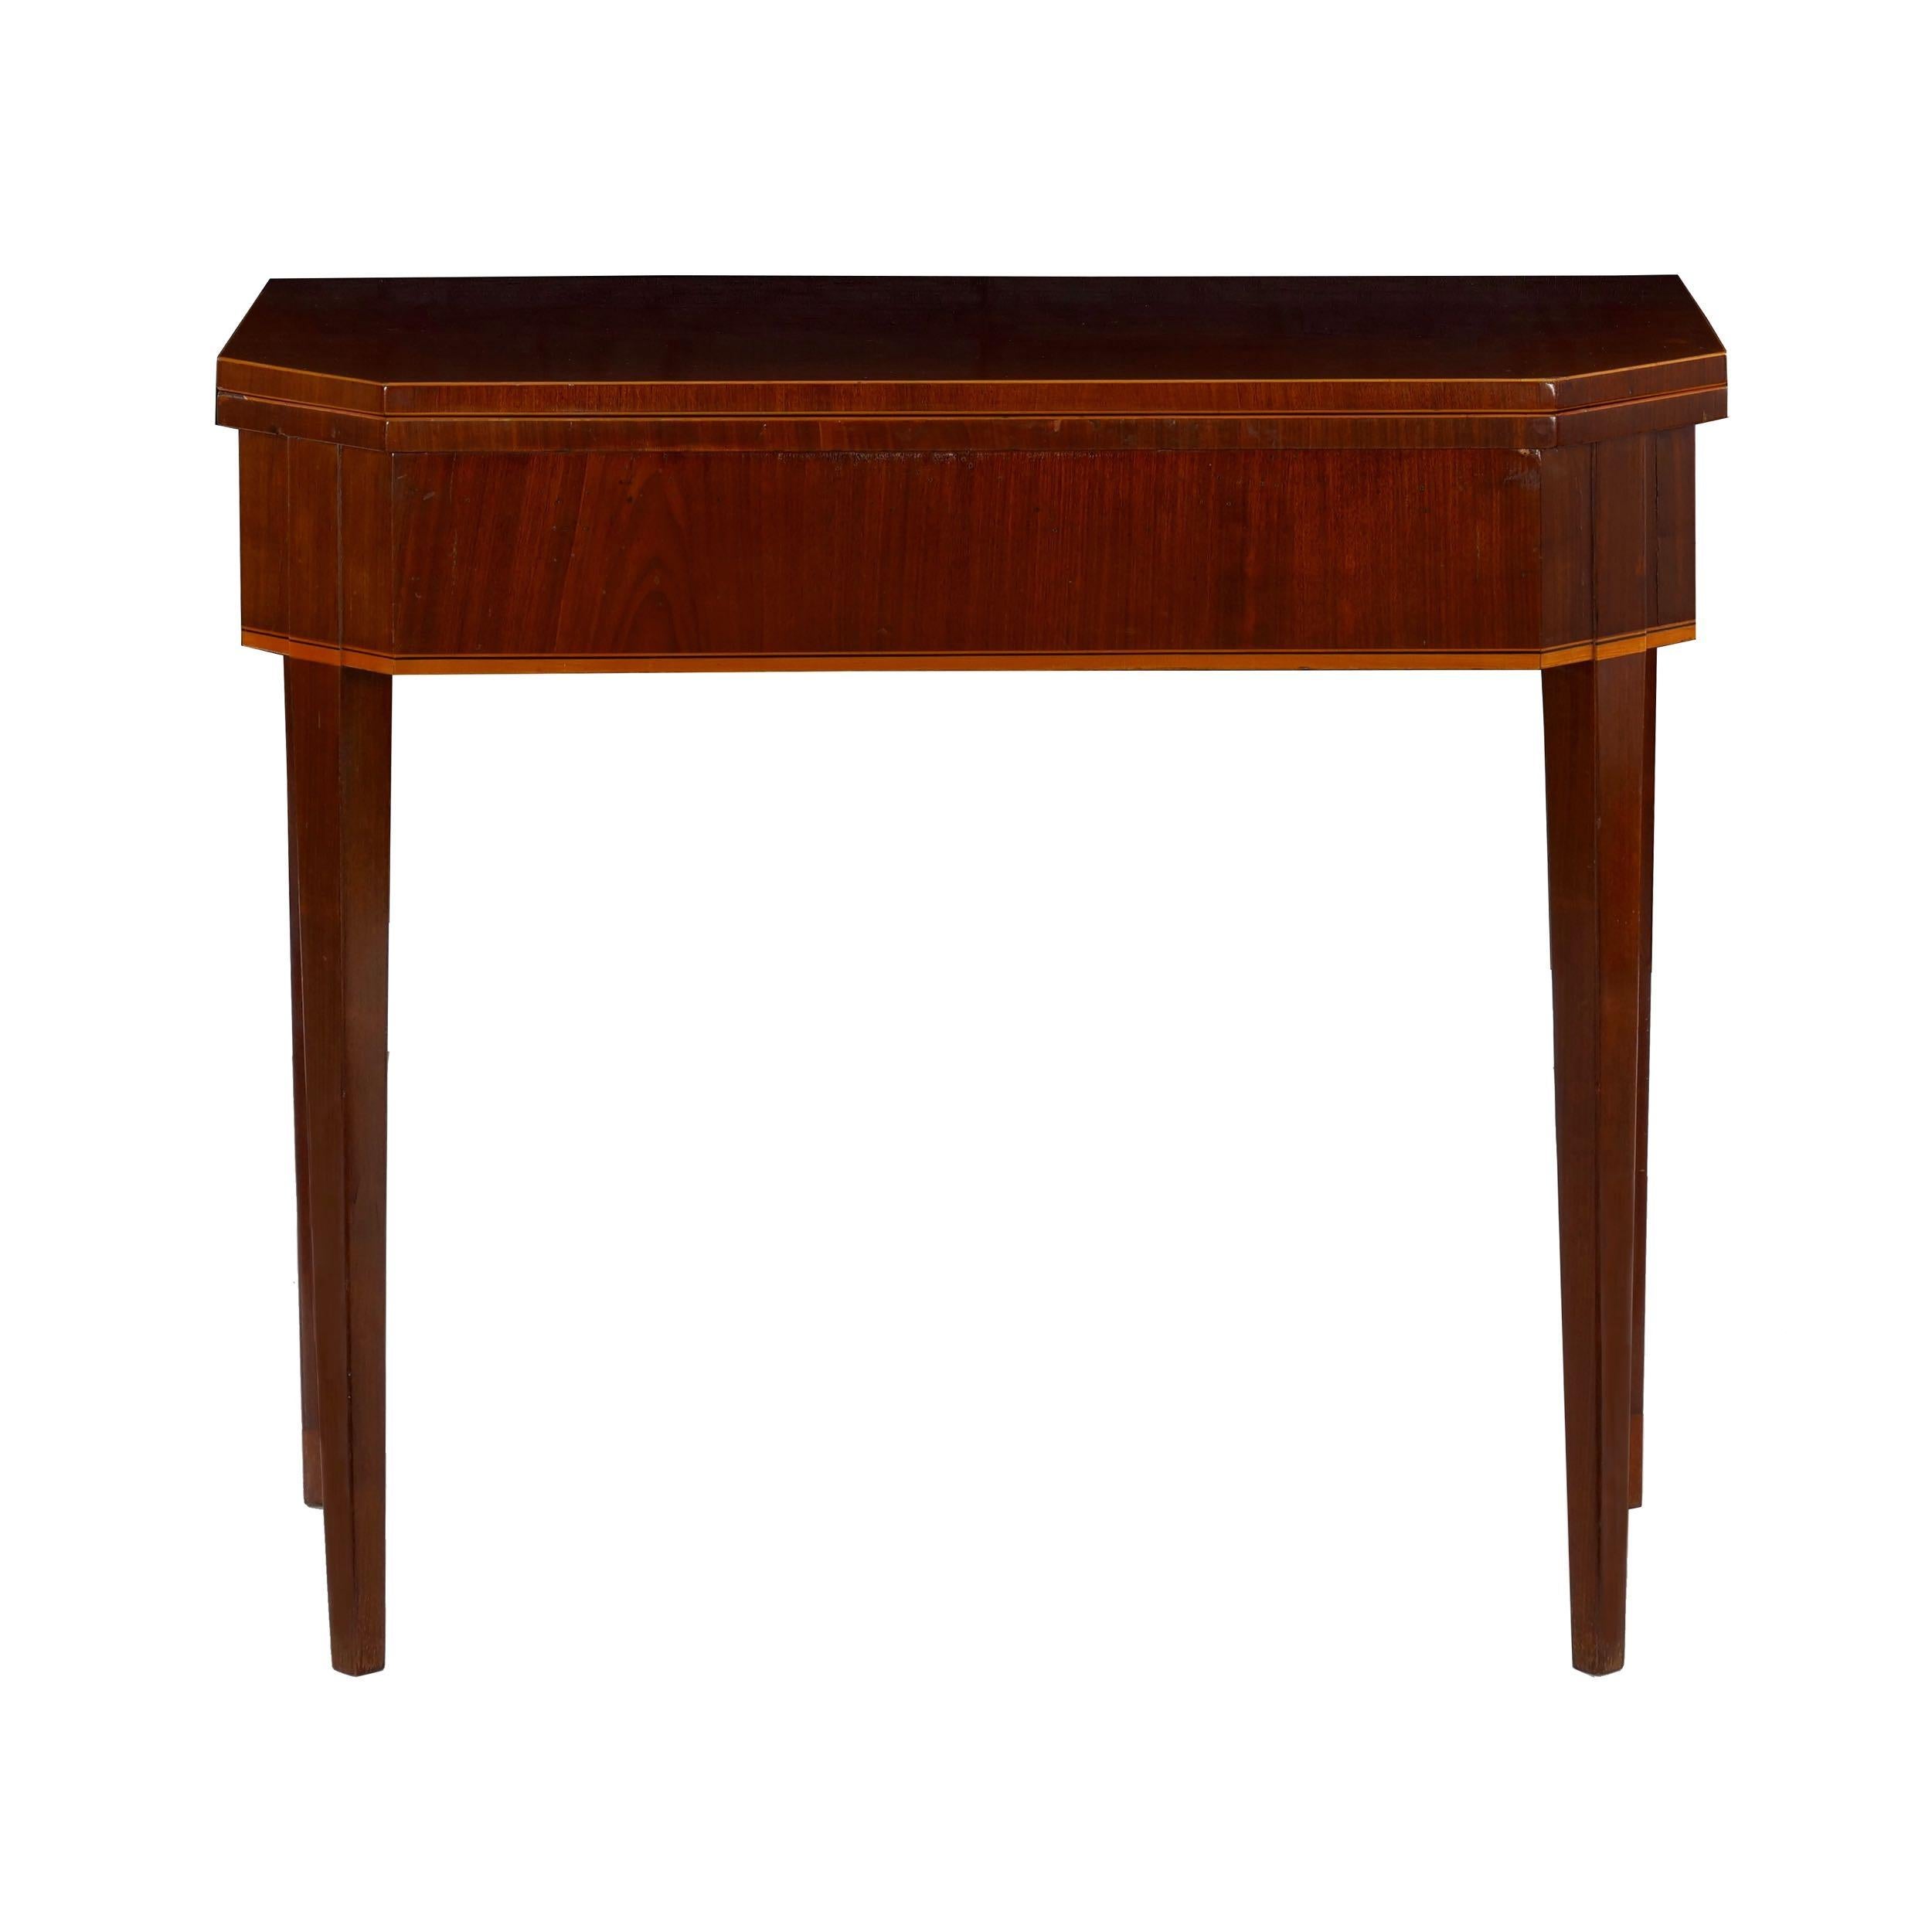 An attractive games table in the neoclassical taste, likely a product of the Baltic States during the first half of the 19th century, this table exhibits the typical form for these popular and versatile tables. First presenting as a console, the